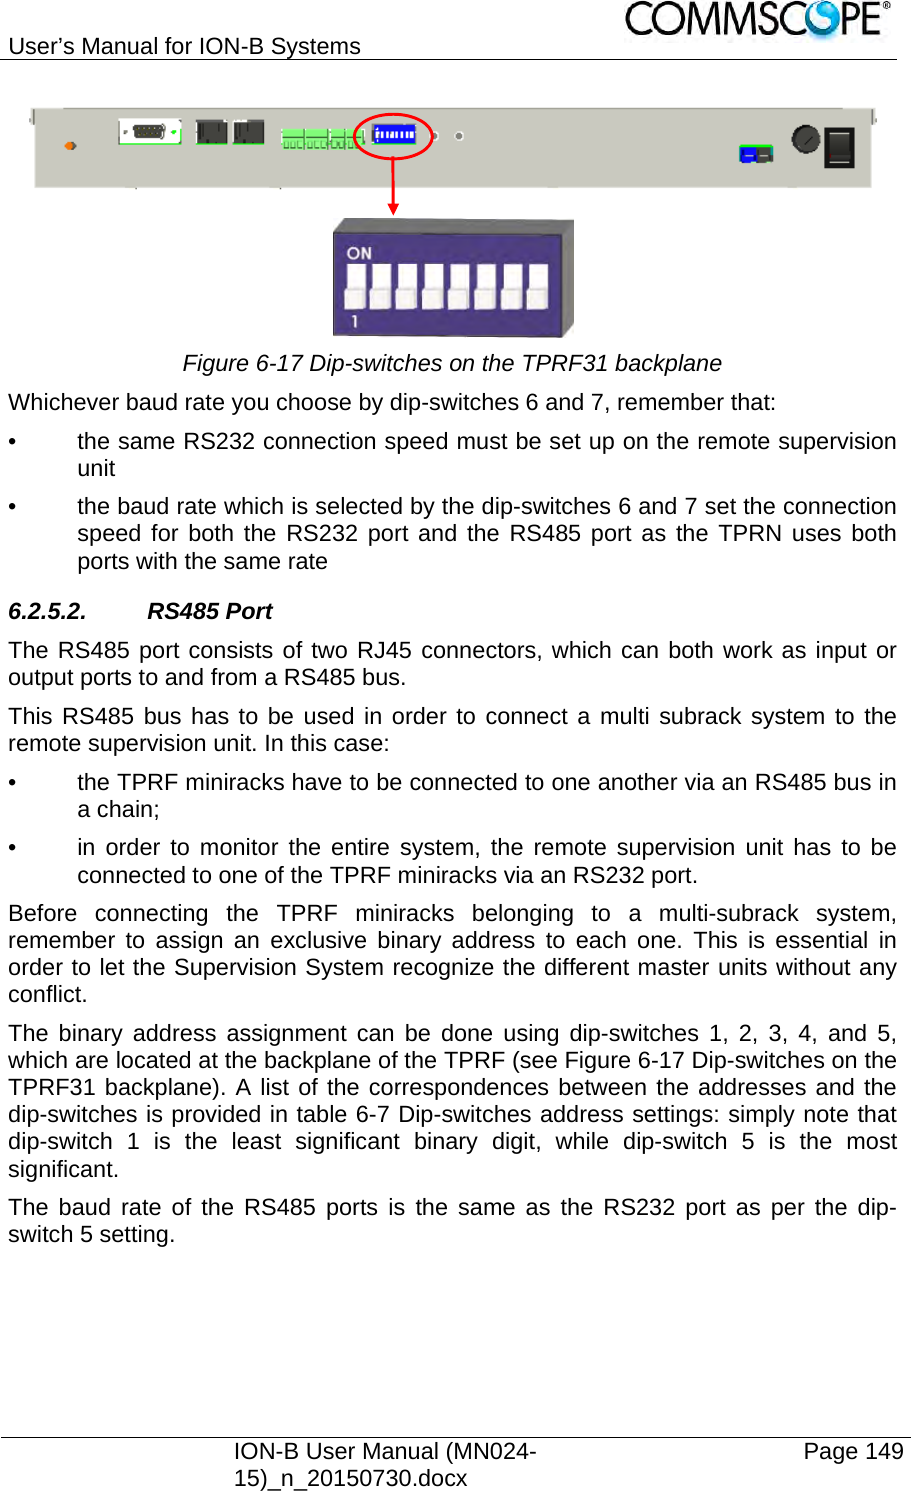 User’s Manual for ION-B Systems    ION-B User Manual (MN024-15)_n_20150730.docx  Page 149    Figure 6-17 Dip-switches on the TPRF31 backplane Whichever baud rate you choose by dip-switches 6 and 7, remember that: •  the same RS232 connection speed must be set up on the remote supervision unit •  the baud rate which is selected by the dip-switches 6 and 7 set the connection speed for both the RS232 port and the RS485 port as the TPRN uses both ports with the same rate 6.2.5.2. RS485 Port The RS485 port consists of two RJ45 connectors, which can both work as input or output ports to and from a RS485 bus. This RS485 bus has to be used in order to connect a multi subrack system to the remote supervision unit. In this case: •  the TPRF miniracks have to be connected to one another via an RS485 bus in a chain; •  in order to monitor the entire system, the remote supervision unit has to be connected to one of the TPRF miniracks via an RS232 port. Before connecting the TPRF miniracks belonging to a multi-subrack system, remember to assign an exclusive binary address to each one. This is essential in order to let the Supervision System recognize the different master units without any conflict. The binary address assignment can be done using dip-switches 1, 2, 3, 4, and 5, which are located at the backplane of the TPRF (see Figure 6-17 Dip-switches on the TPRF31 backplane). A list of the correspondences between the addresses and the dip-switches is provided in table 6-7 Dip-switches address settings: simply note that dip-switch 1 is the least significant binary digit, while dip-switch 5 is the most significant. The baud rate of the RS485 ports is the same as the RS232 port as per the dip-switch 5 setting.  